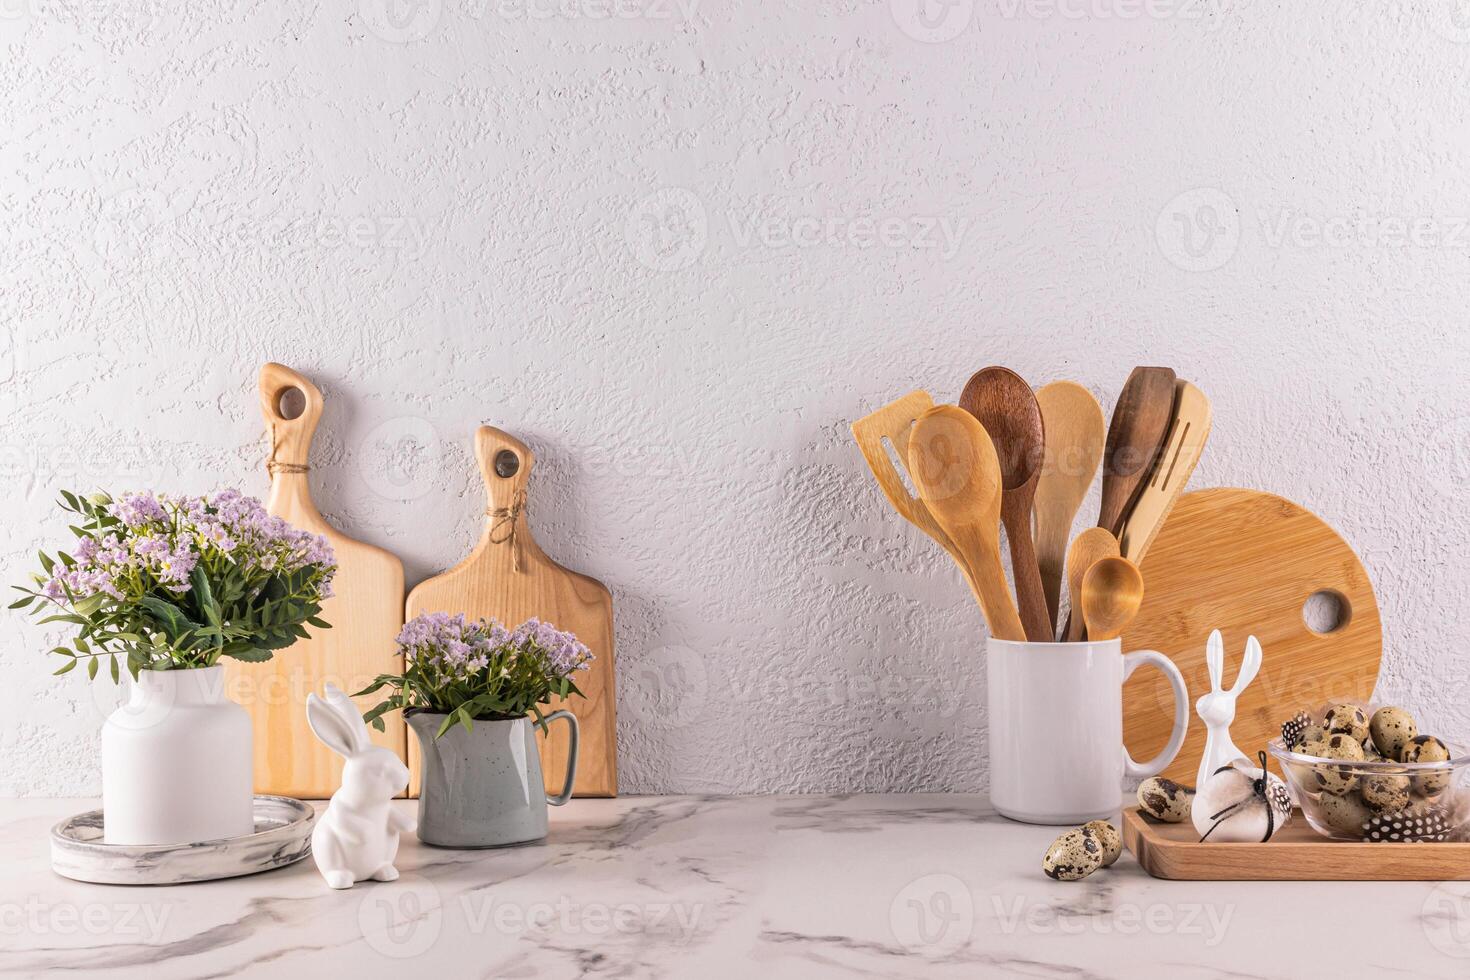 Wooden kitchen utensils made of eco-friendly materials, spring flowers in a vase and jug, Easter bunny figurines on a marble countertop. Front view. photo